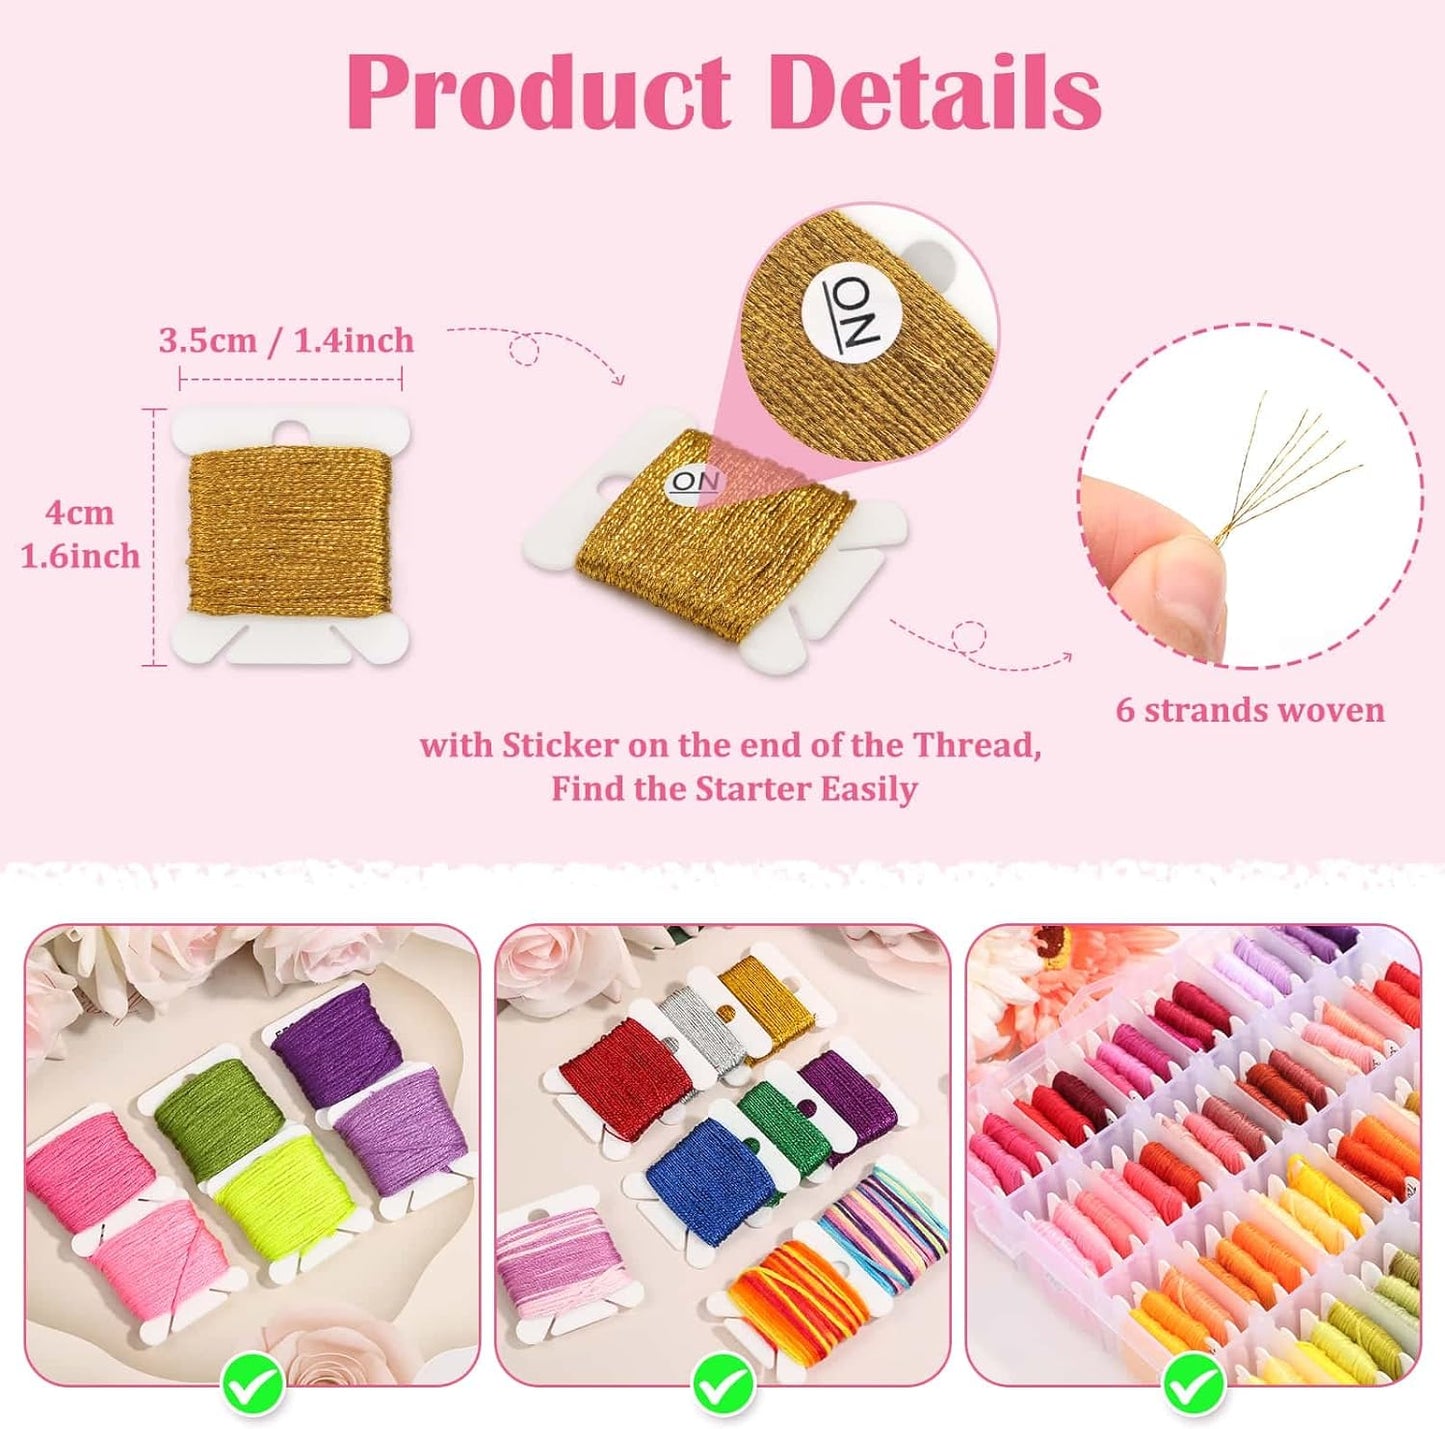 985Pcs String Bracelet Making Kit, Friendship Bracelet String Kit with 110 Skeins Embroidery Floss Cross Stitch Thread, 830 Beads for Friendship Bracelet Making, 45Pcs Embroidery Tools